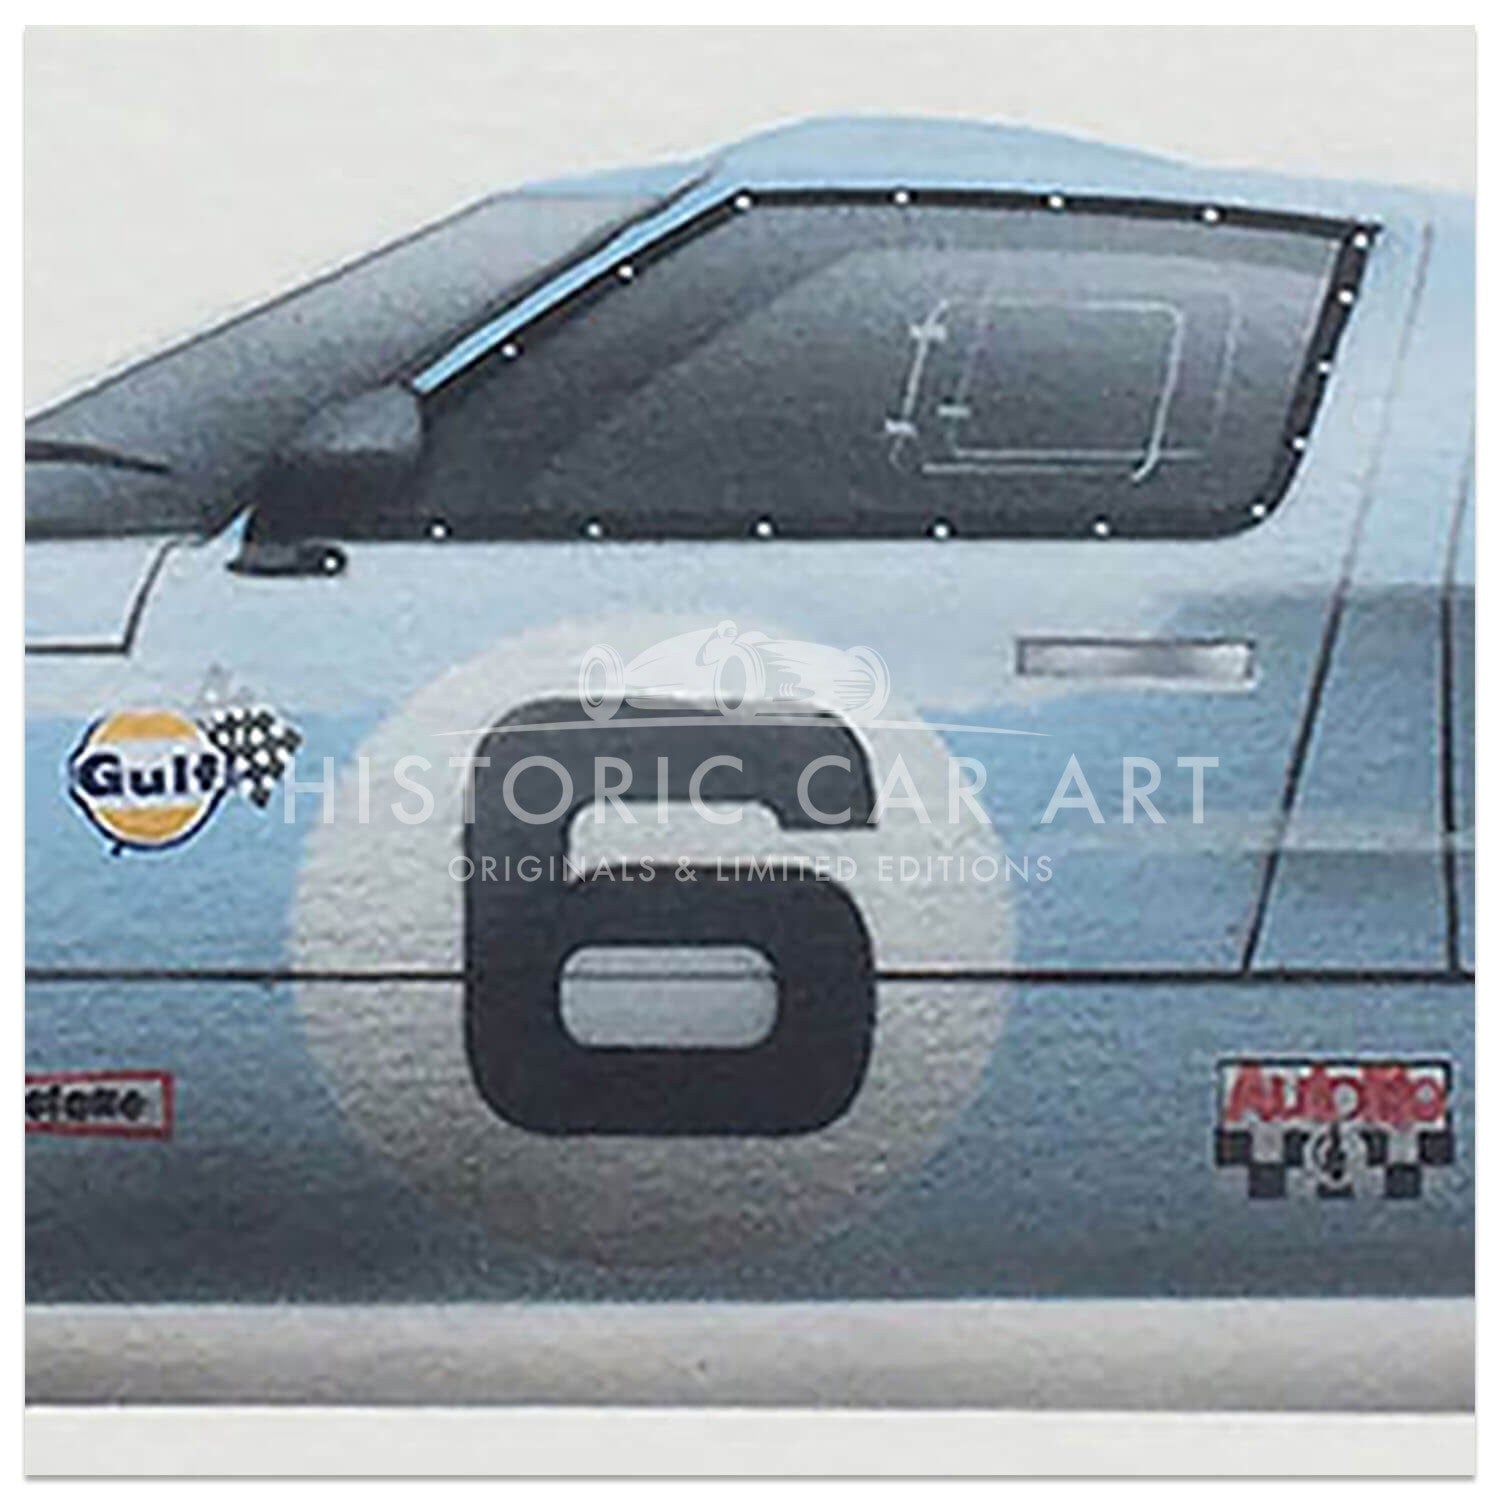 Gulf Ford GT40 | Ickx / Oliver | Le Mans 24 Hours 1969 | Artwork